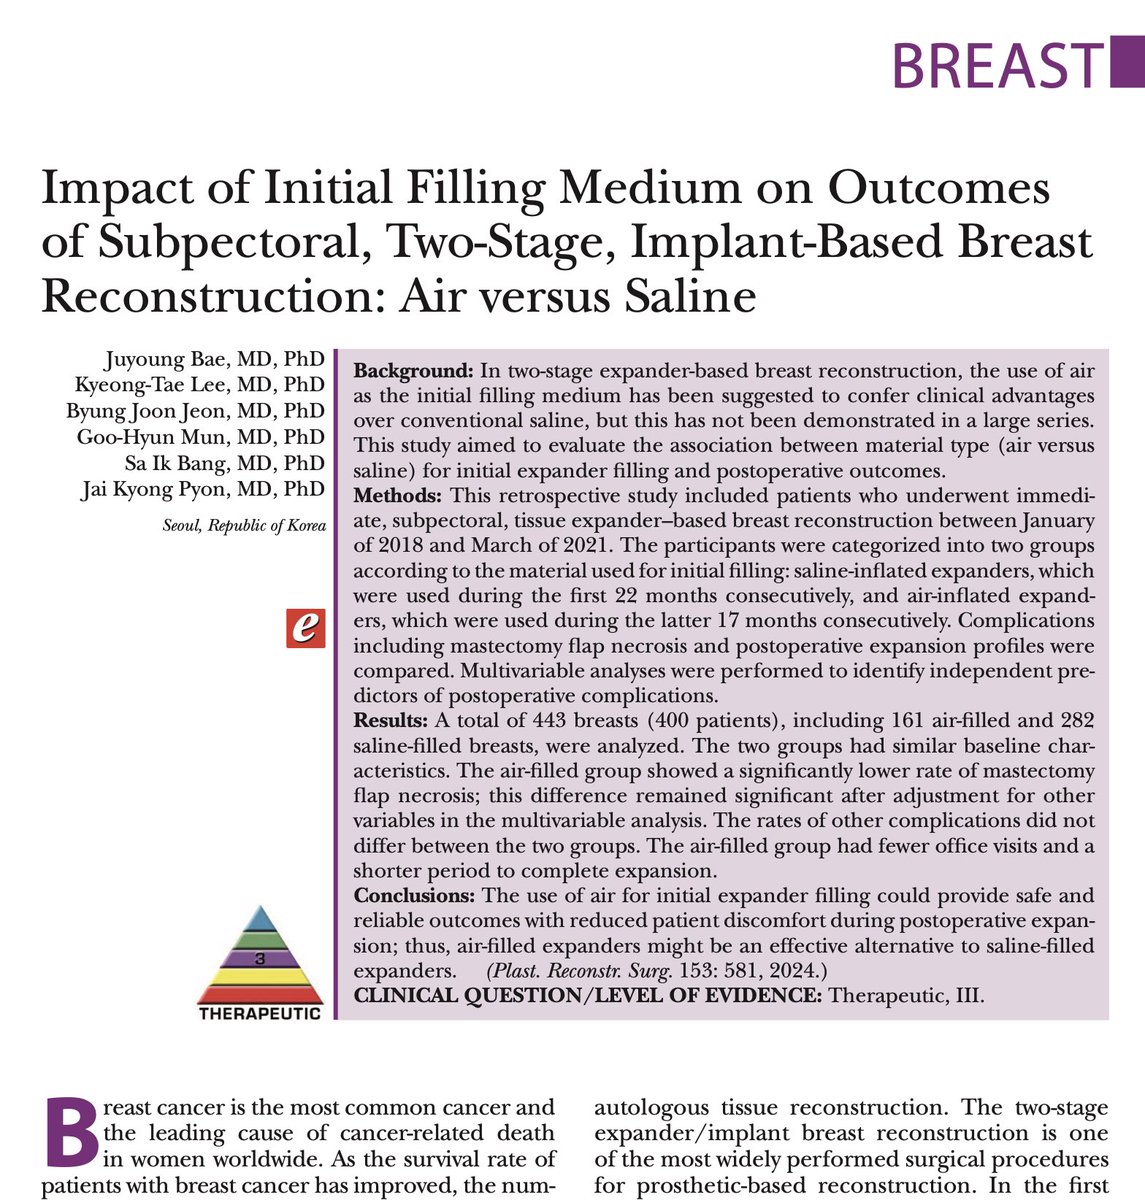 The growing interest in using air for breast tissue expansion was shown to be safe, resulting in lower rates of flap necrosis and fewer expansion visits. It is certainly worth considering as an alternative to saline expansion. #PlasticSurgery @PRSJournal bit.ly/3SQVjsJ